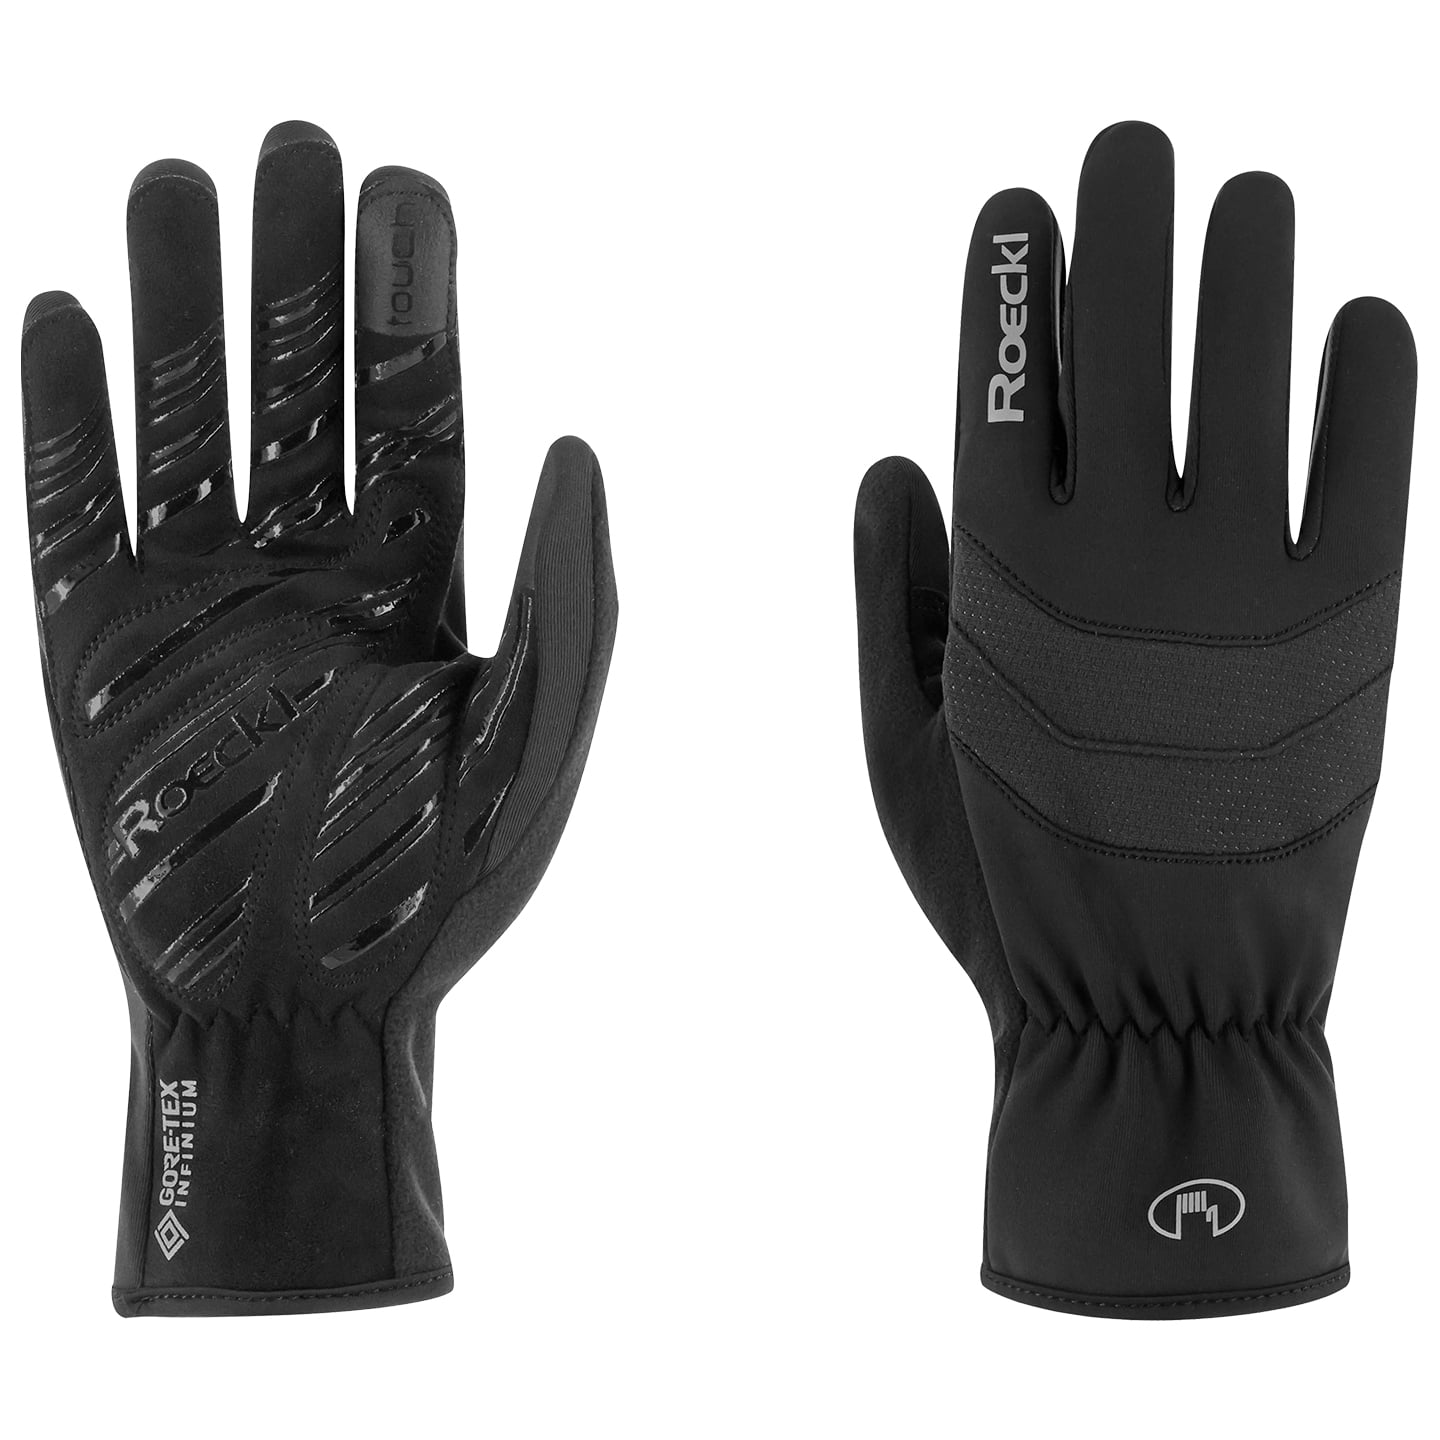 ROECKL Raiano Winter Gloves Winter Cycling Gloves, for men, size 11,5